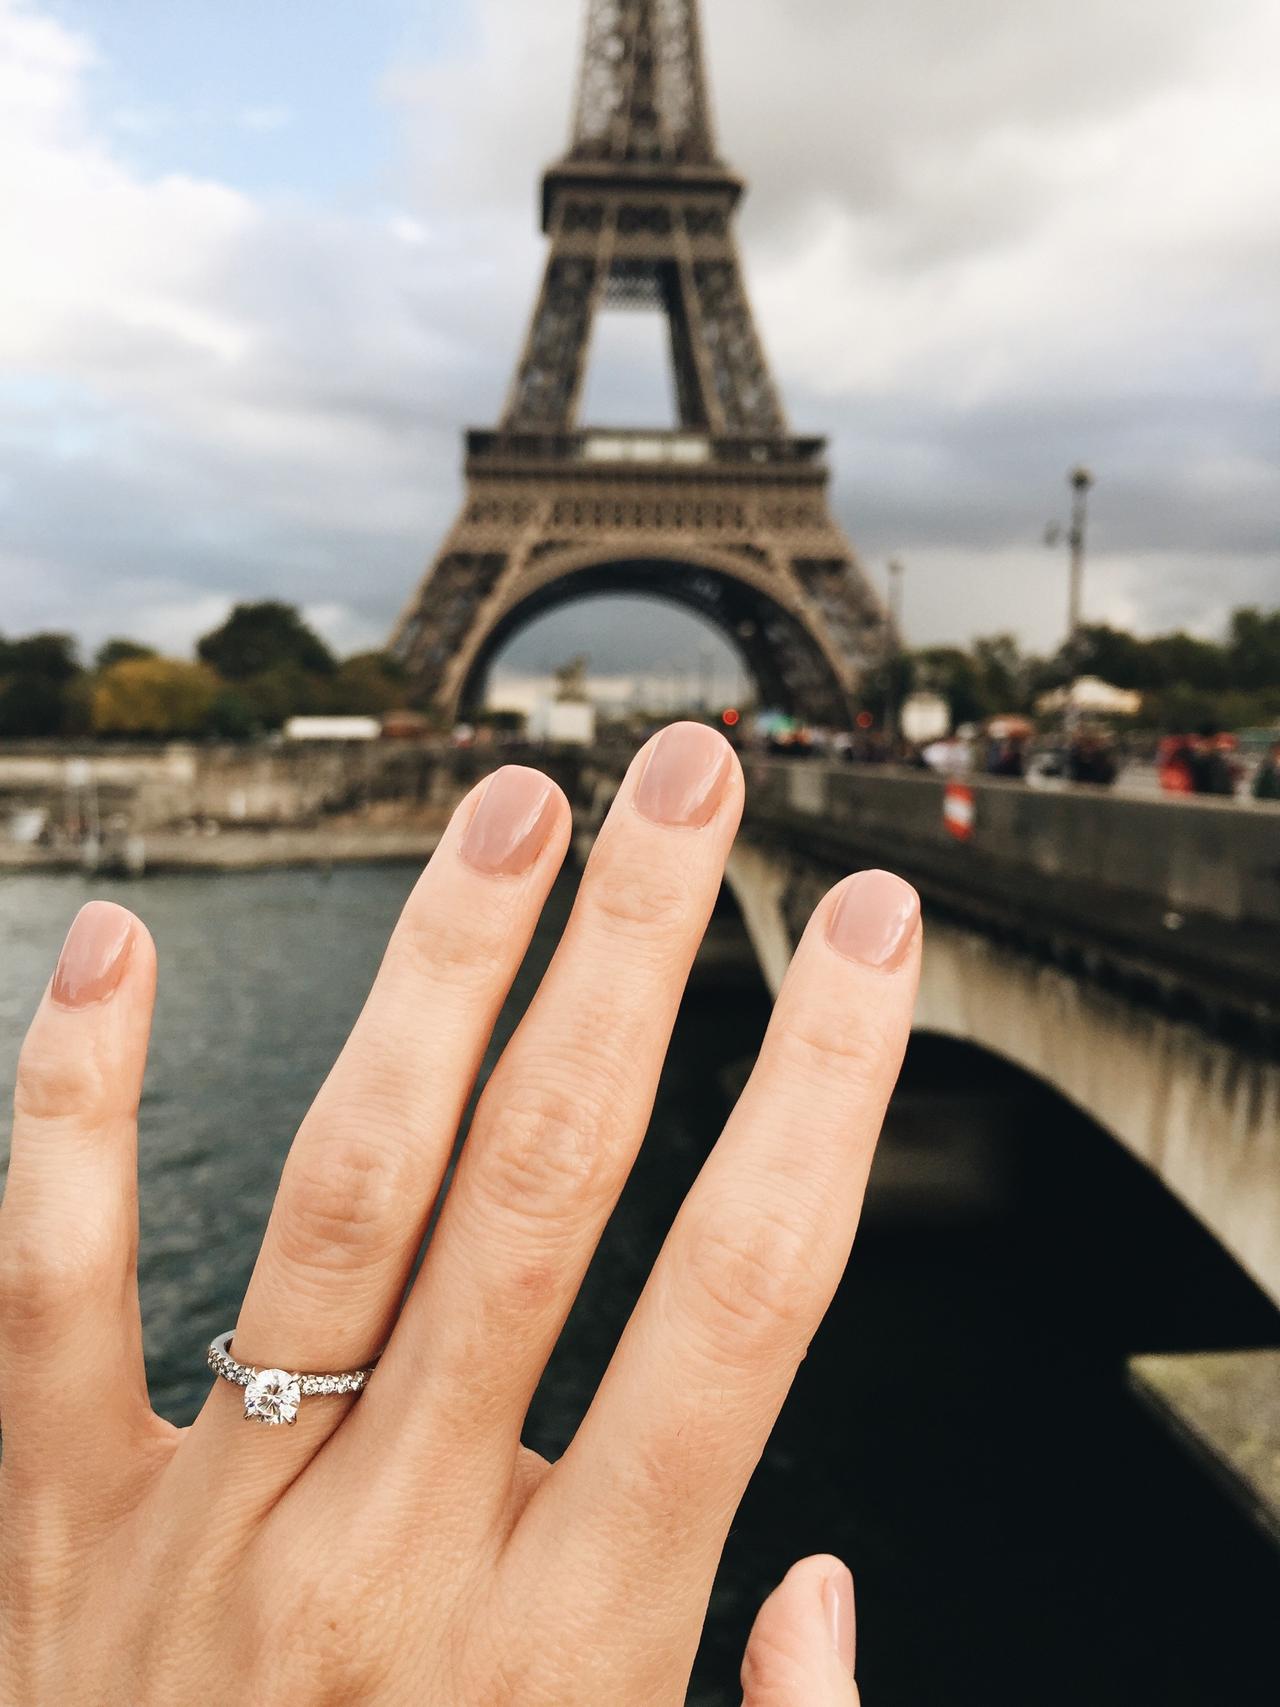 25+ Unique & Artsy Ideas to Get your Engagement Rings Photographed |  WeddingBazaar